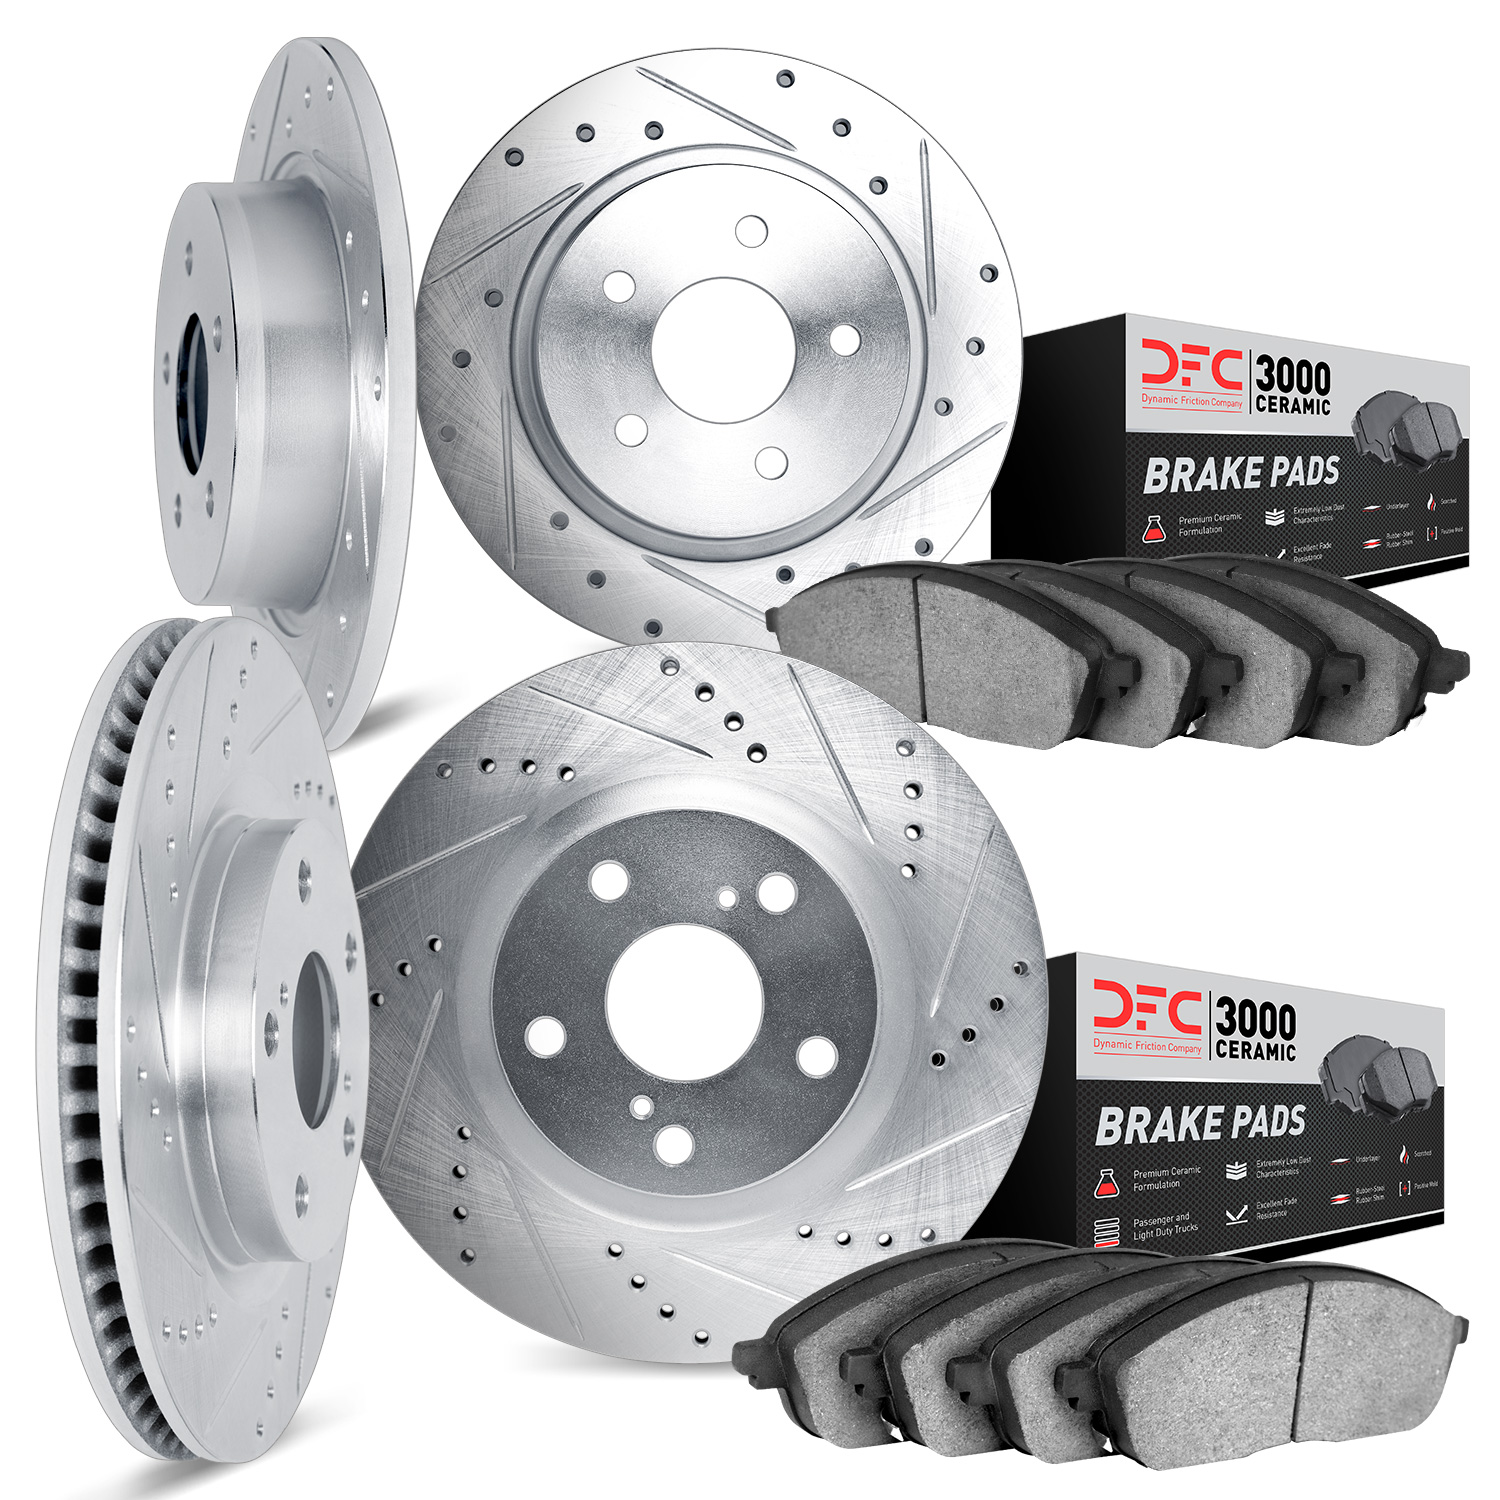 7304-80036 Drilled/Slotted Brake Rotor with 3000-Series Ceramic Brake Pads Kit [Silver], 2013-2015 Ford/Lincoln/Mercury/Mazda, P